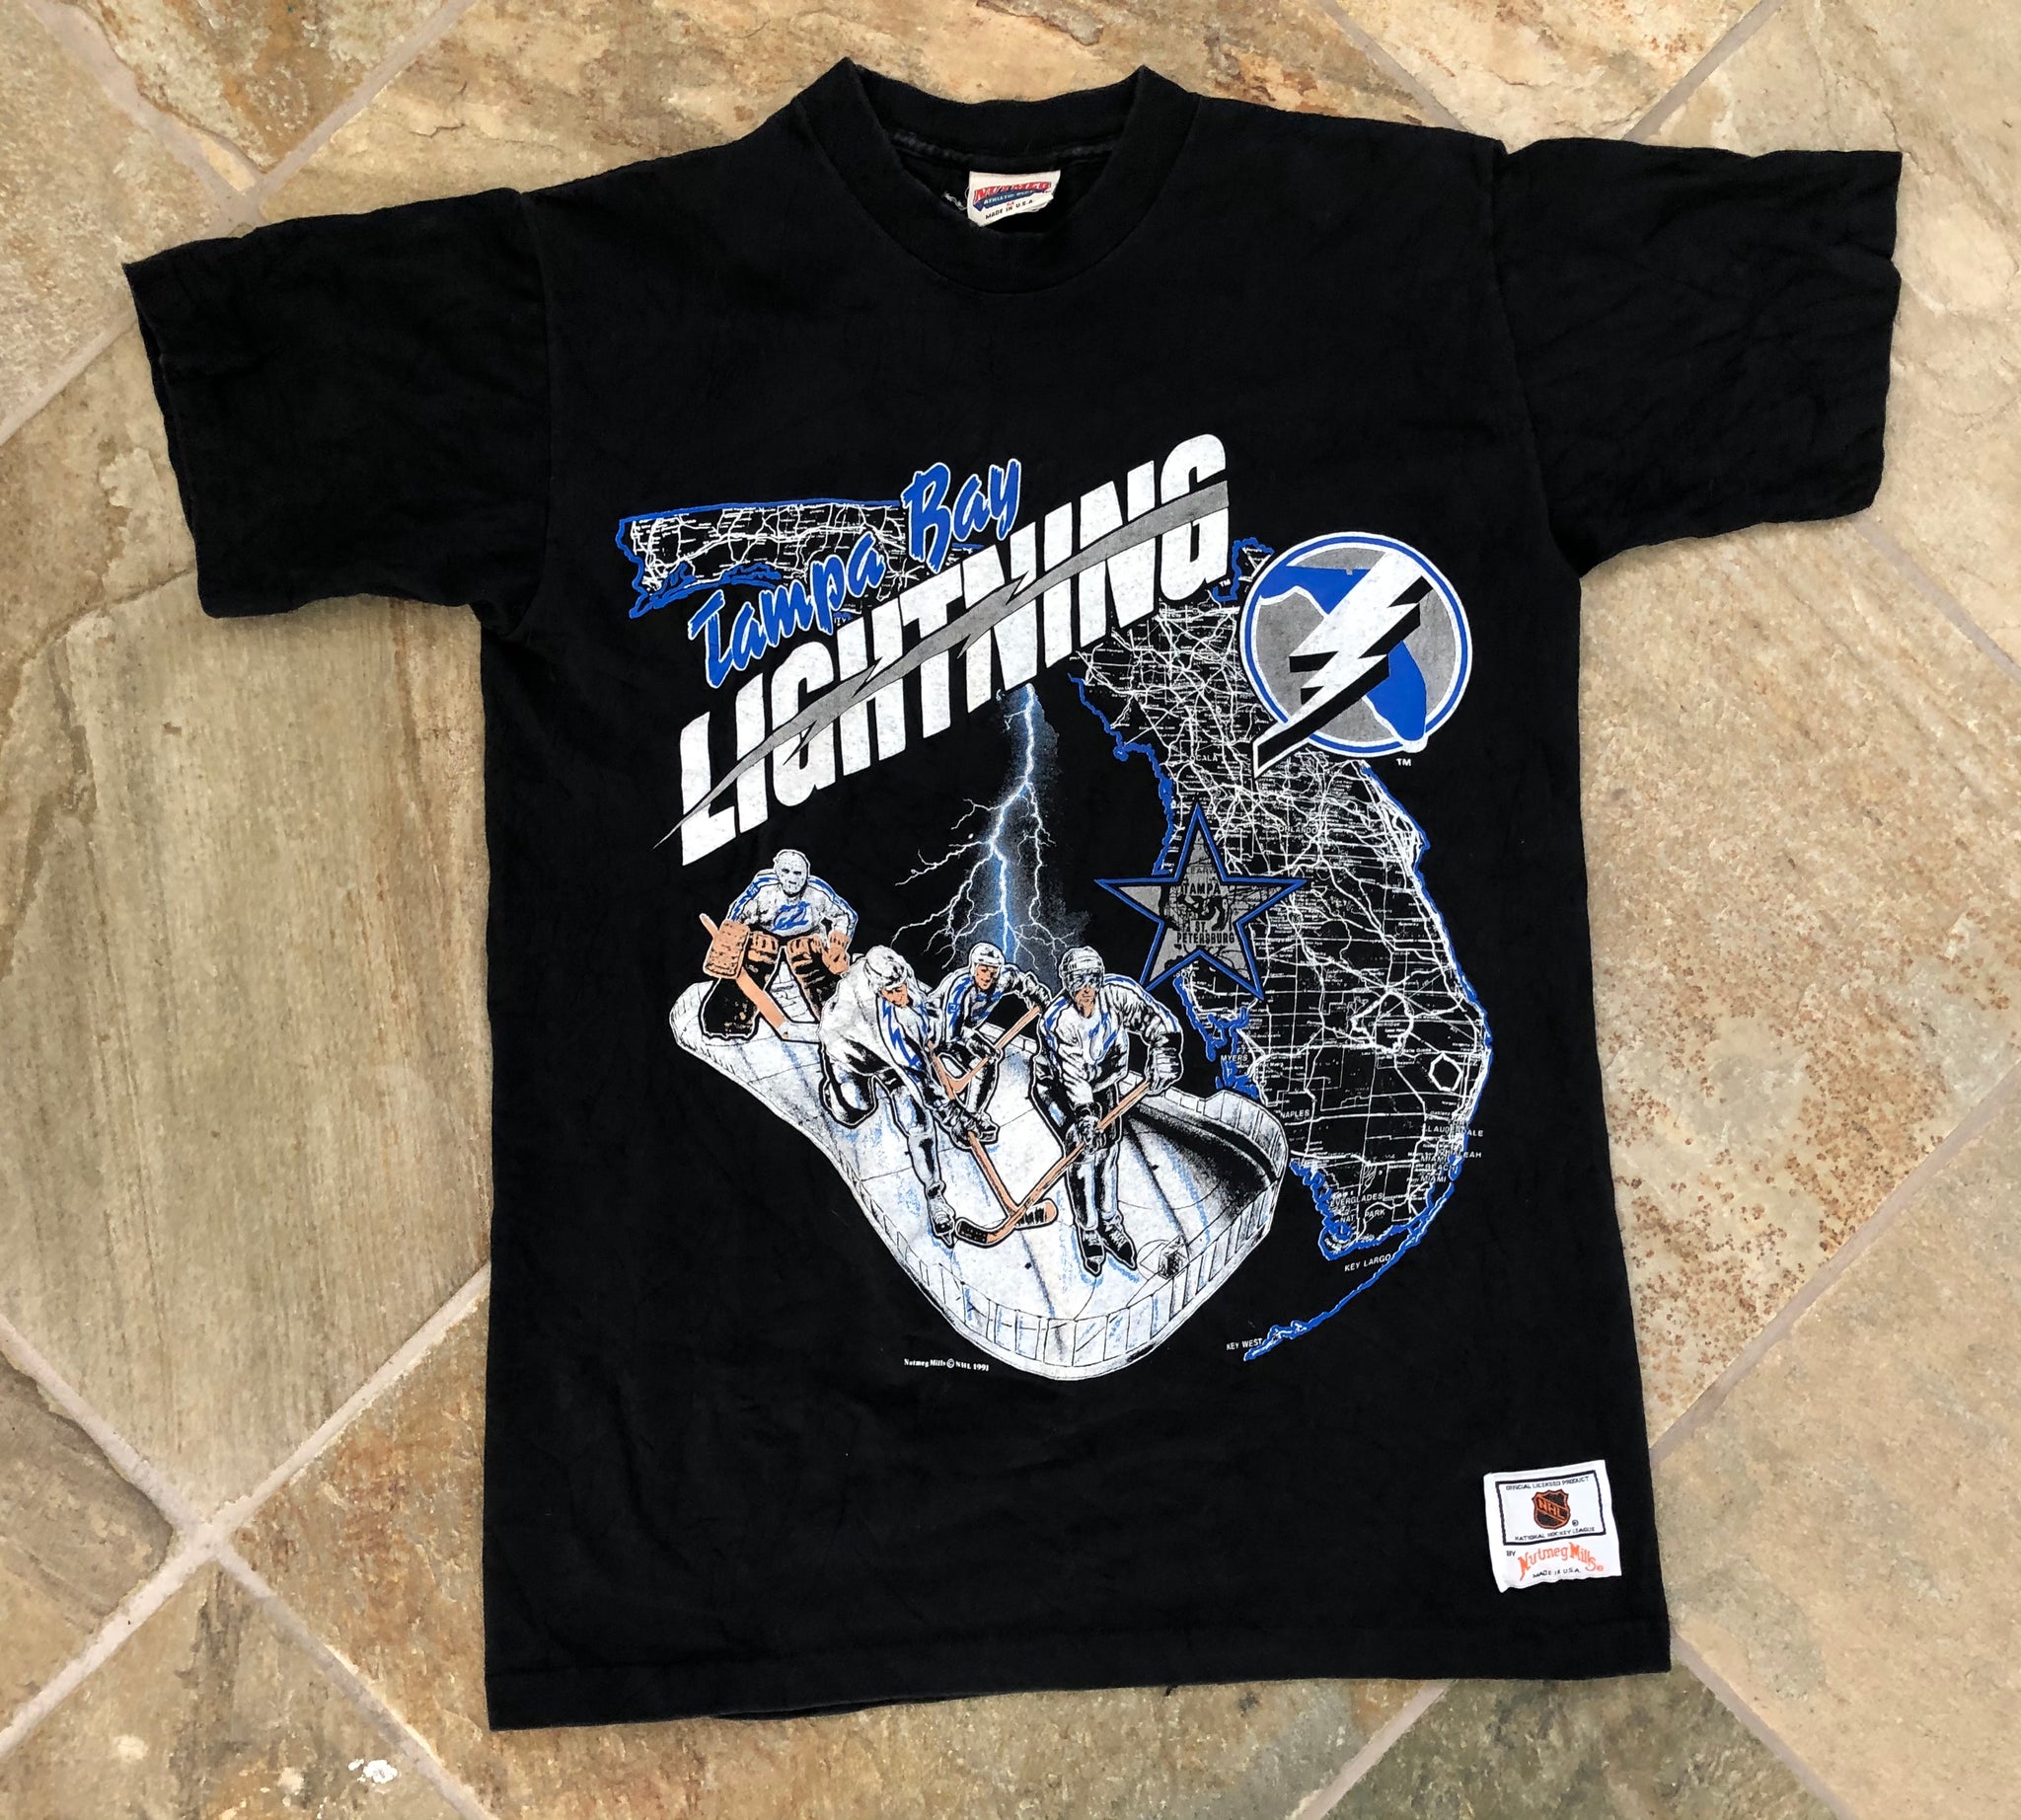  Tampa Bay Hockey Team The Bolts Vintage Florida Est 1992 T-Shirt  : Clothing, Shoes & Jewelry